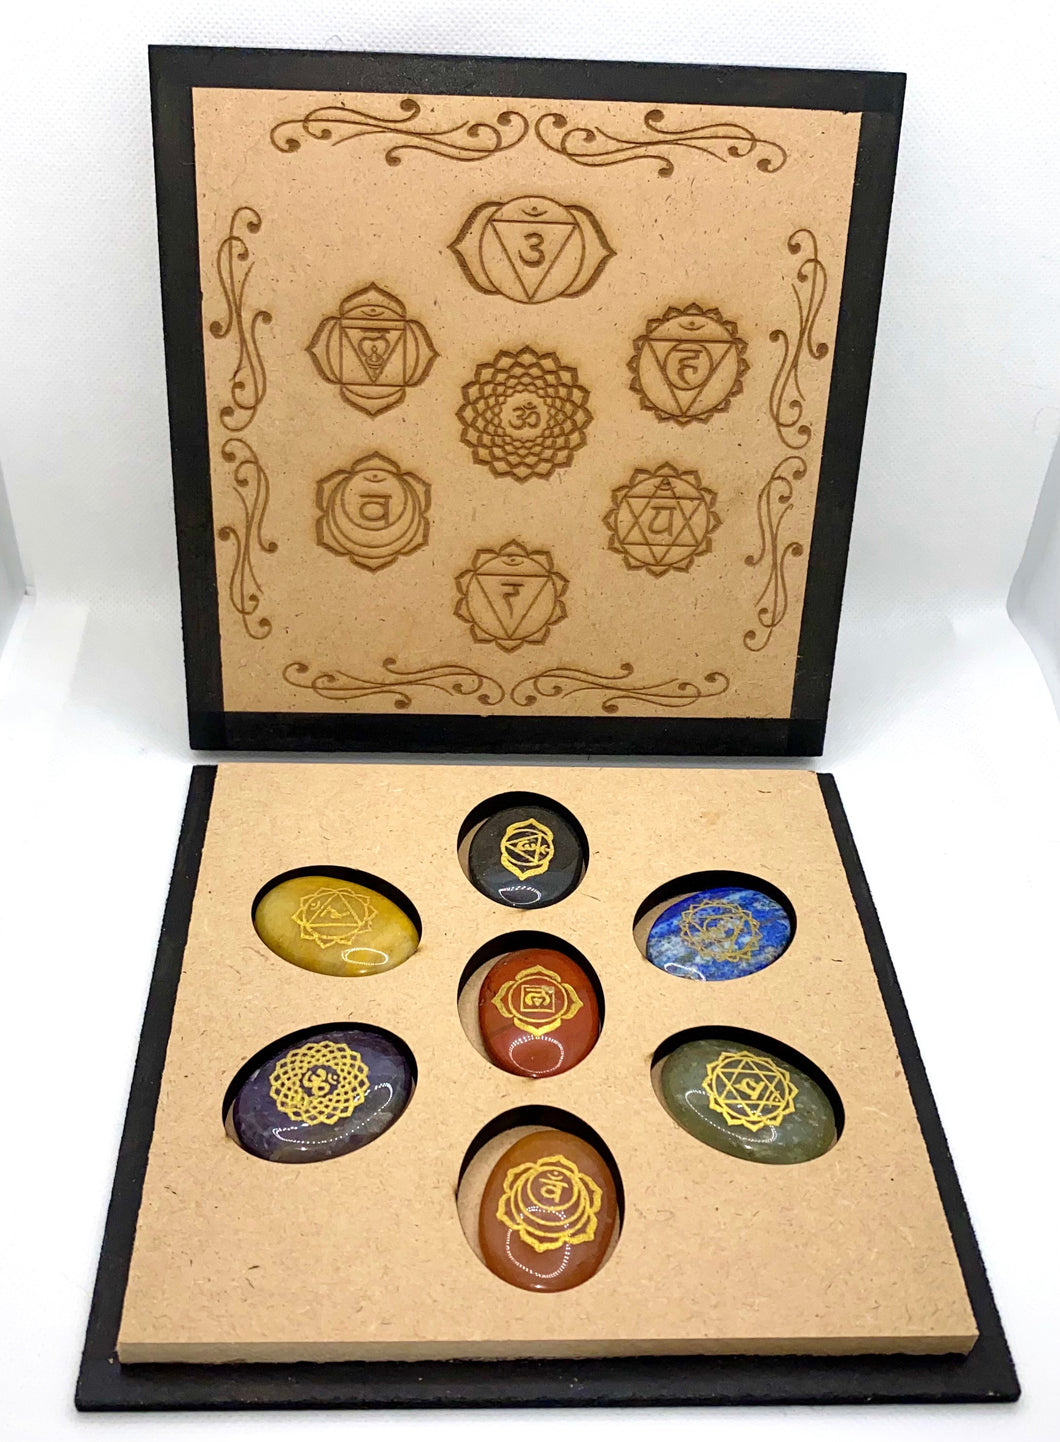 7 Chakra Engraved Stone with Wooden Box